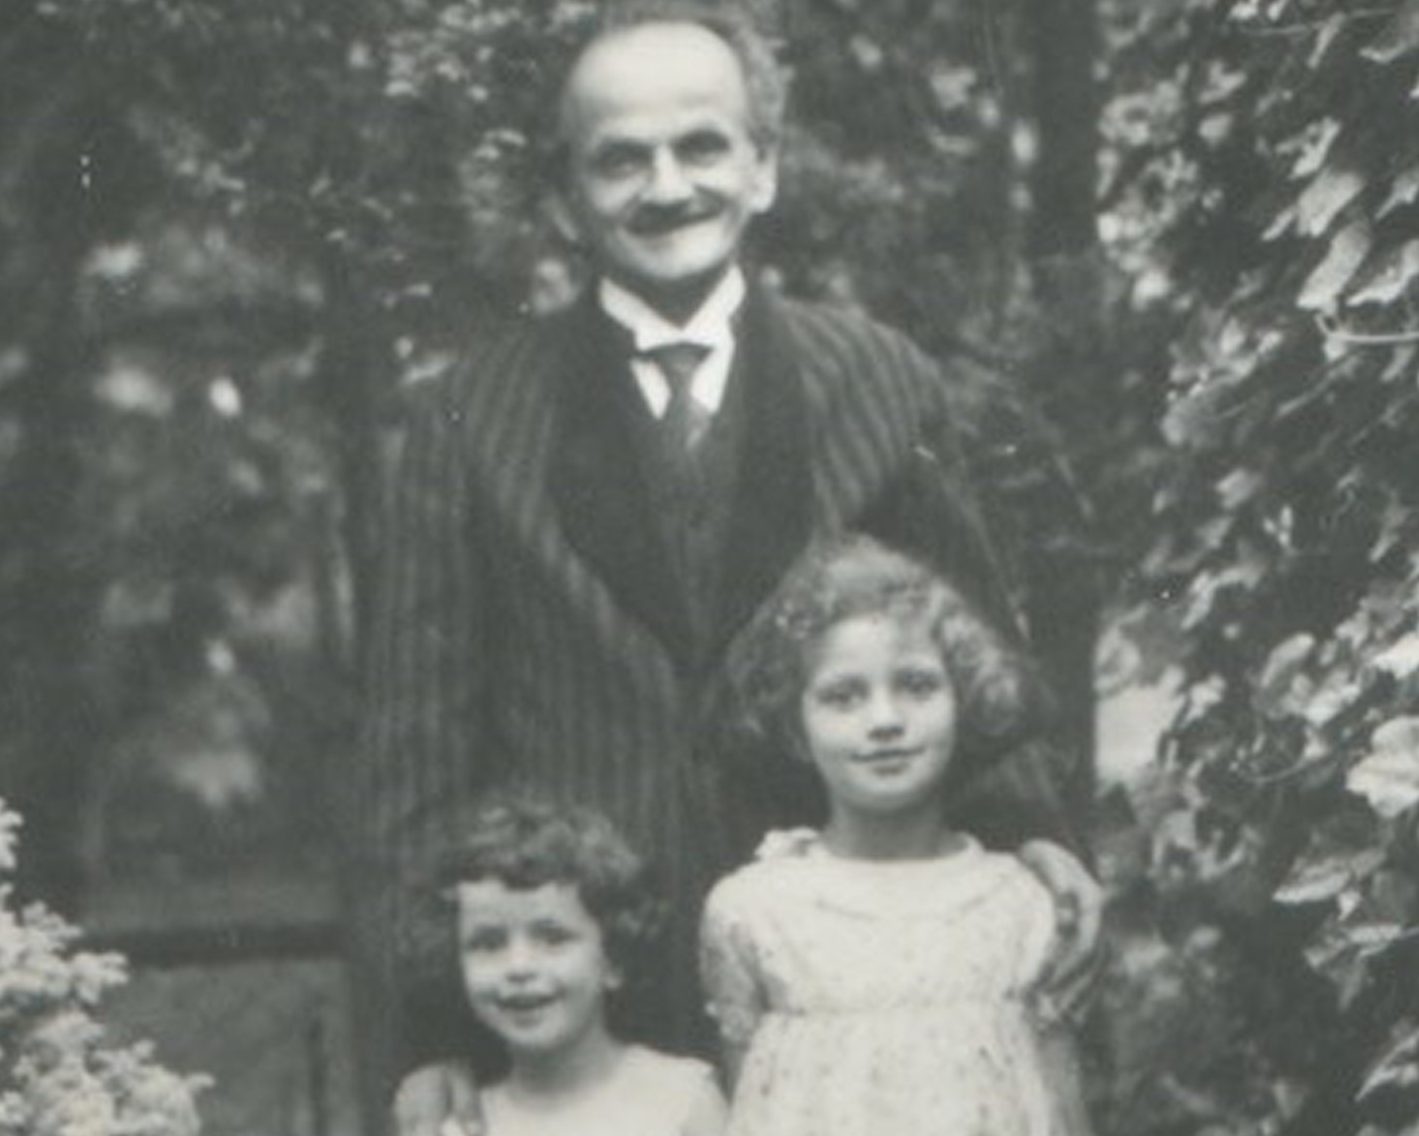 Karola and Lotte with their father Adolf, who perished in the Nazi brutality of the Second World War.